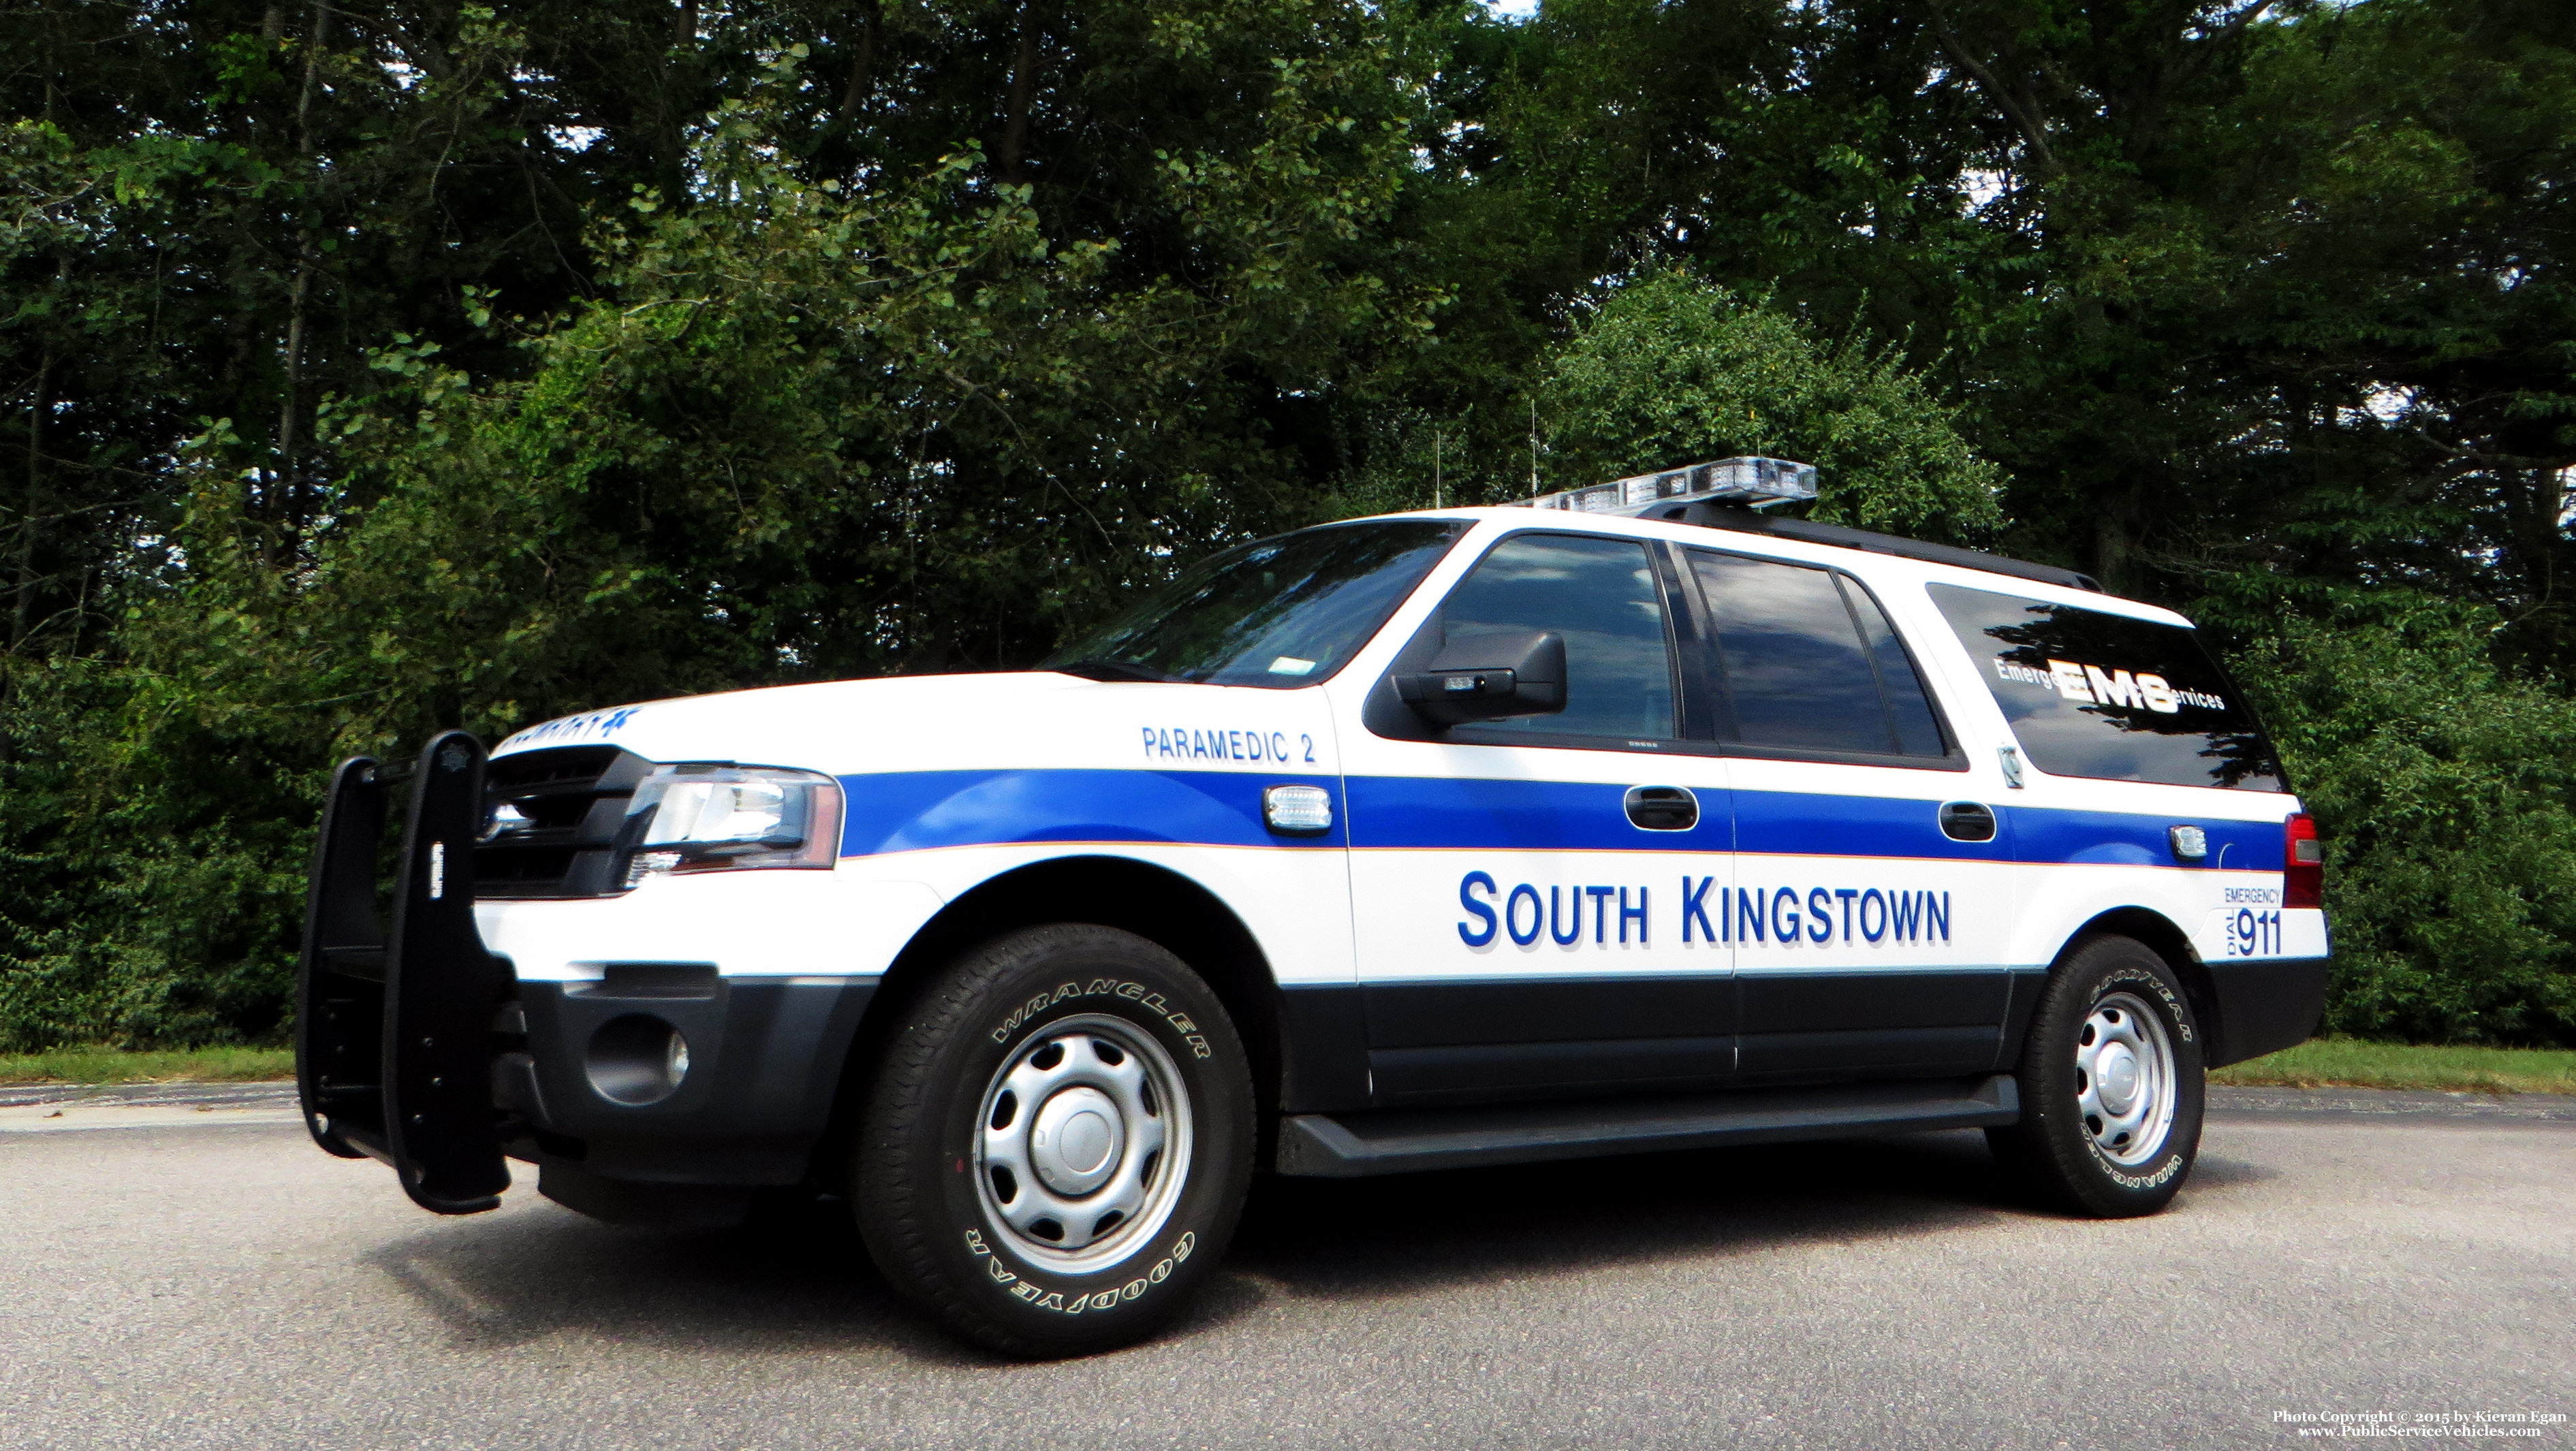 A photo  of South Kingstown EMS
            Paramedic 2, a 2015 Ford Expedition             taken by Kieran Egan